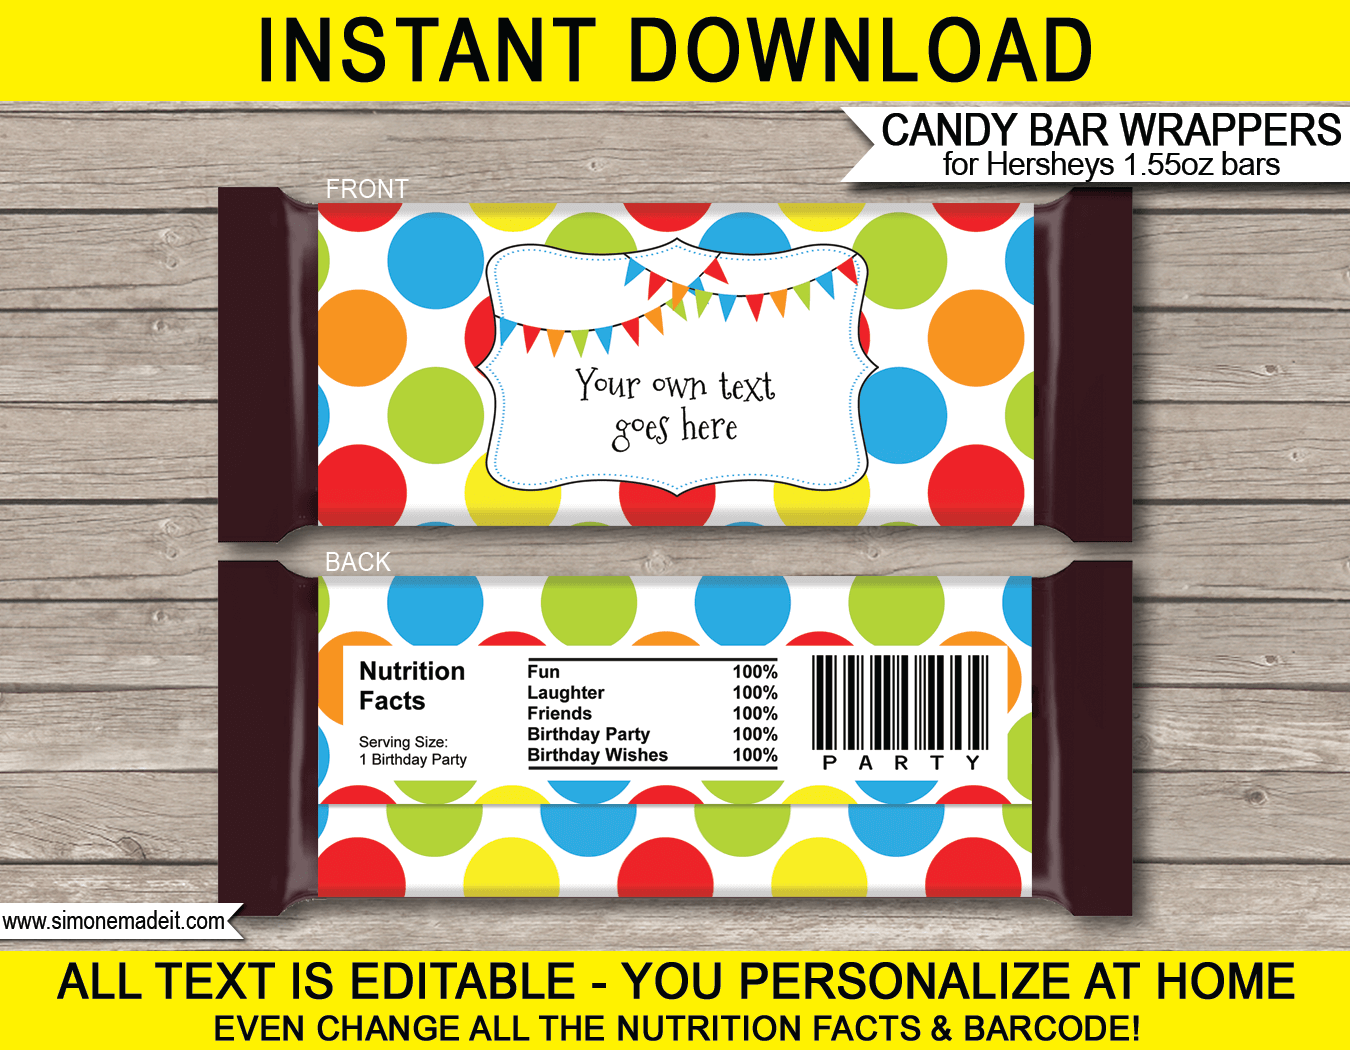 Colorful Polkadot Hershey Candy Bar Wrappers | Birthday Party Favors | Personalized Candy Bars | Editable Template | INSTANT DOWNLOAD $3.00 via simonemadeit.com